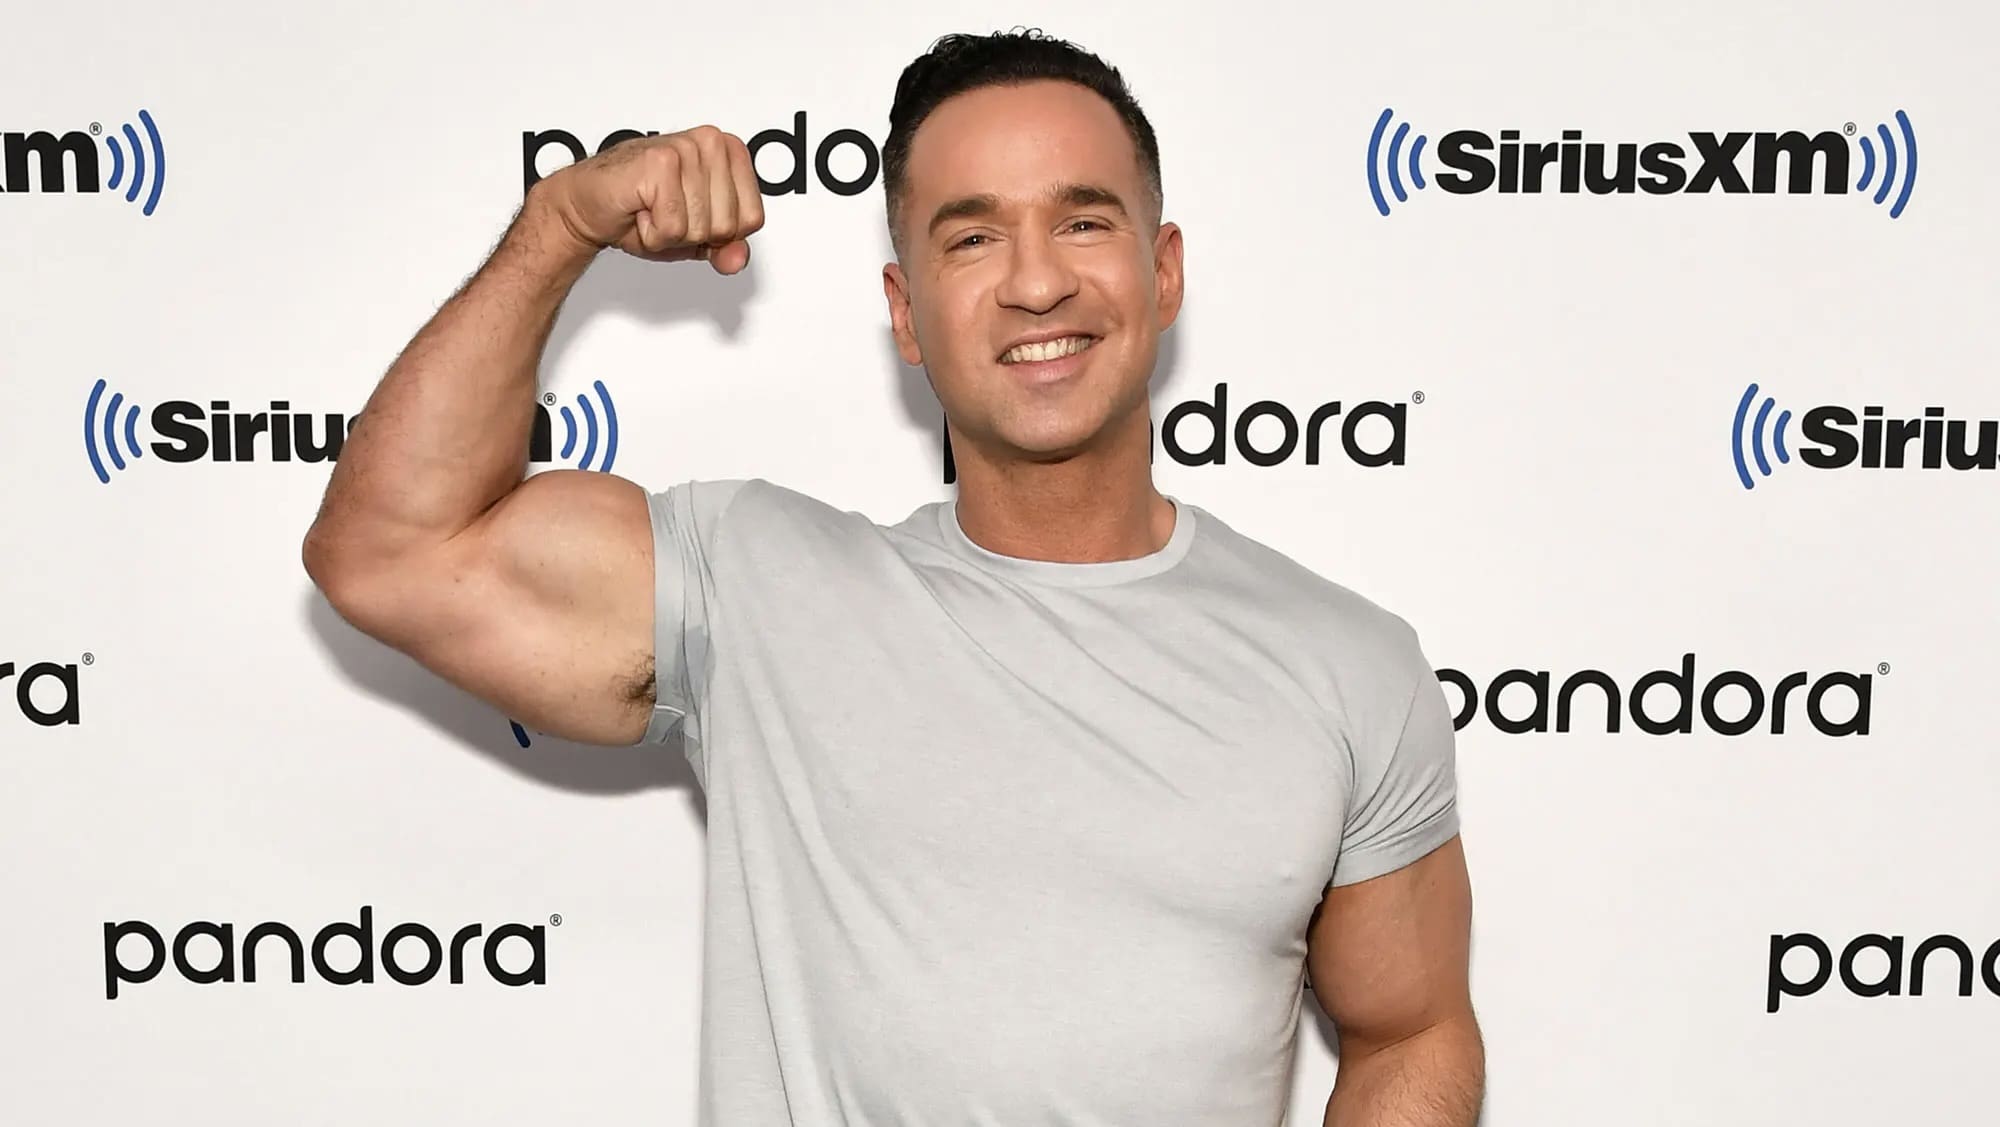 Mike ‘The Situation’ Sorrentino Recalls Trying Heroin, Spending $500K on Drugs and Almost Released Sex Tape When Money Was Low